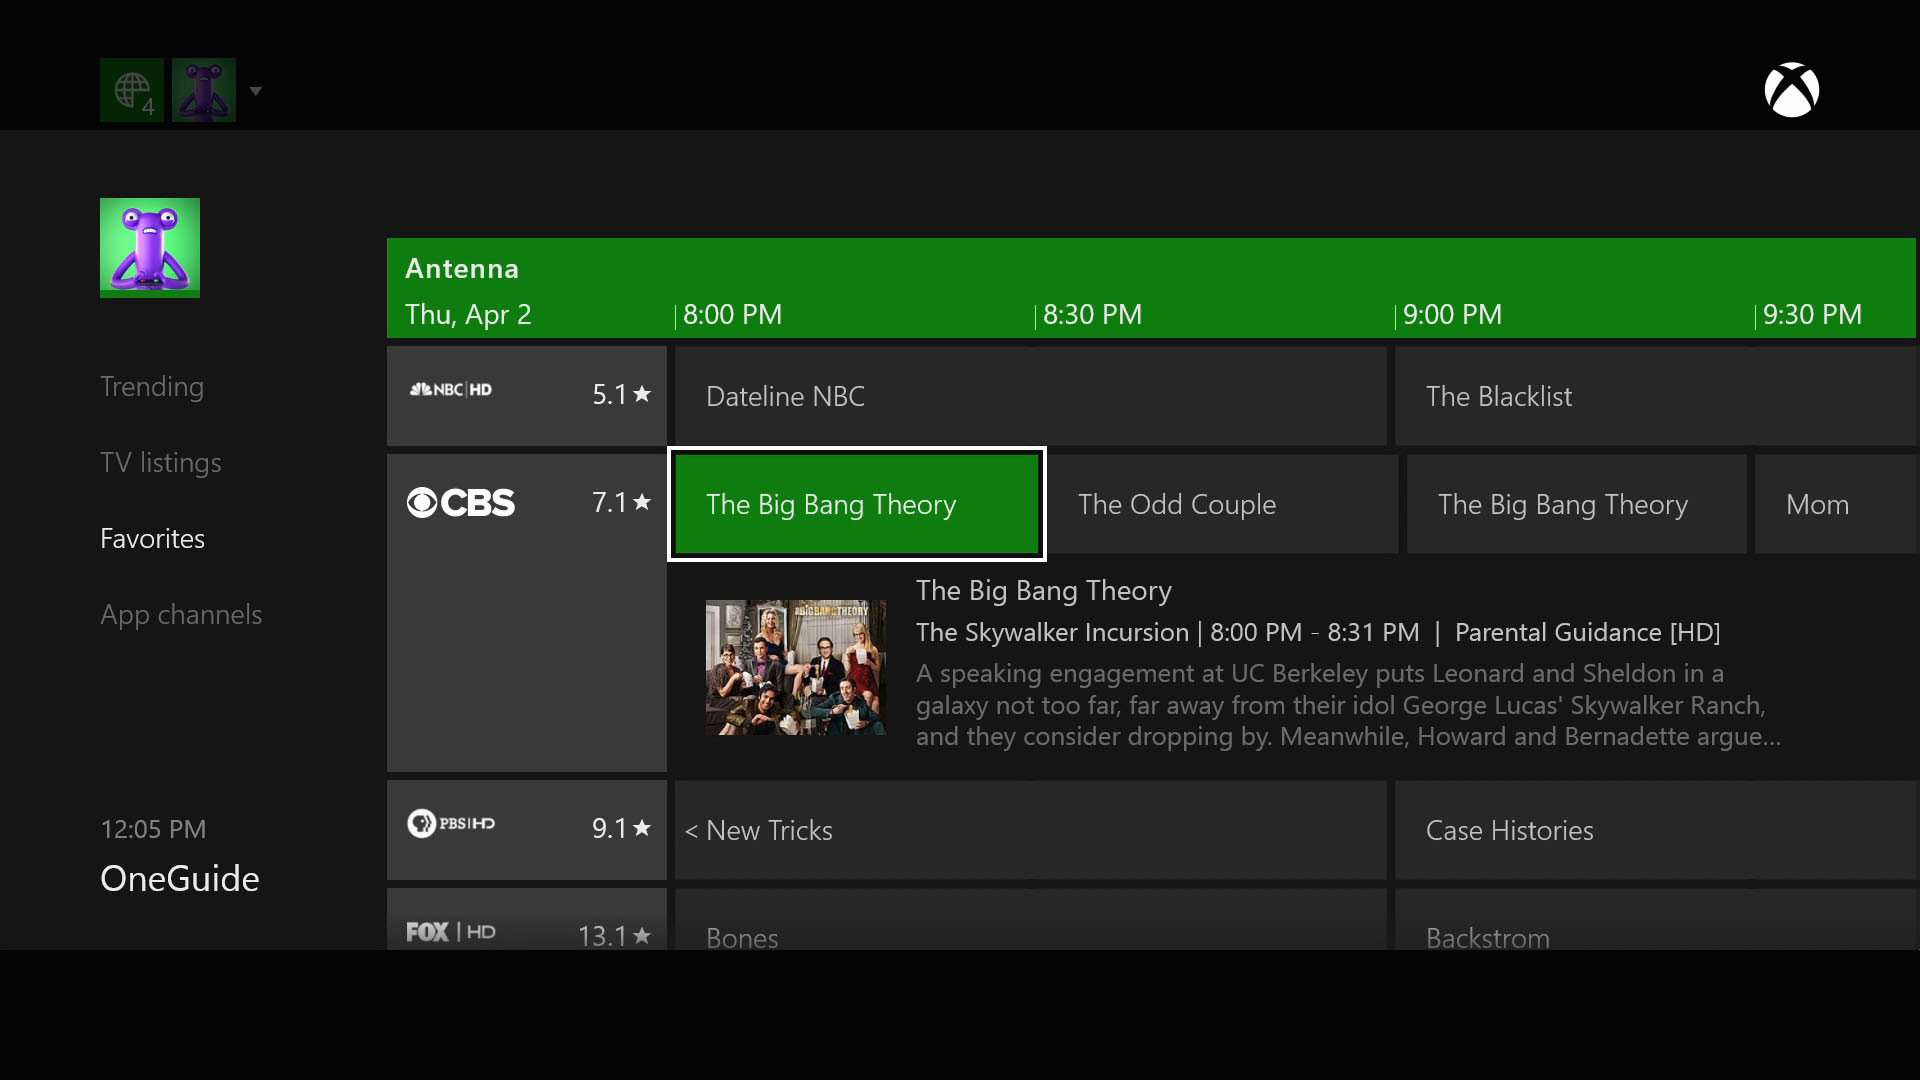 1920x1080 Xbox TV has OneGuide: a built-in TV guide